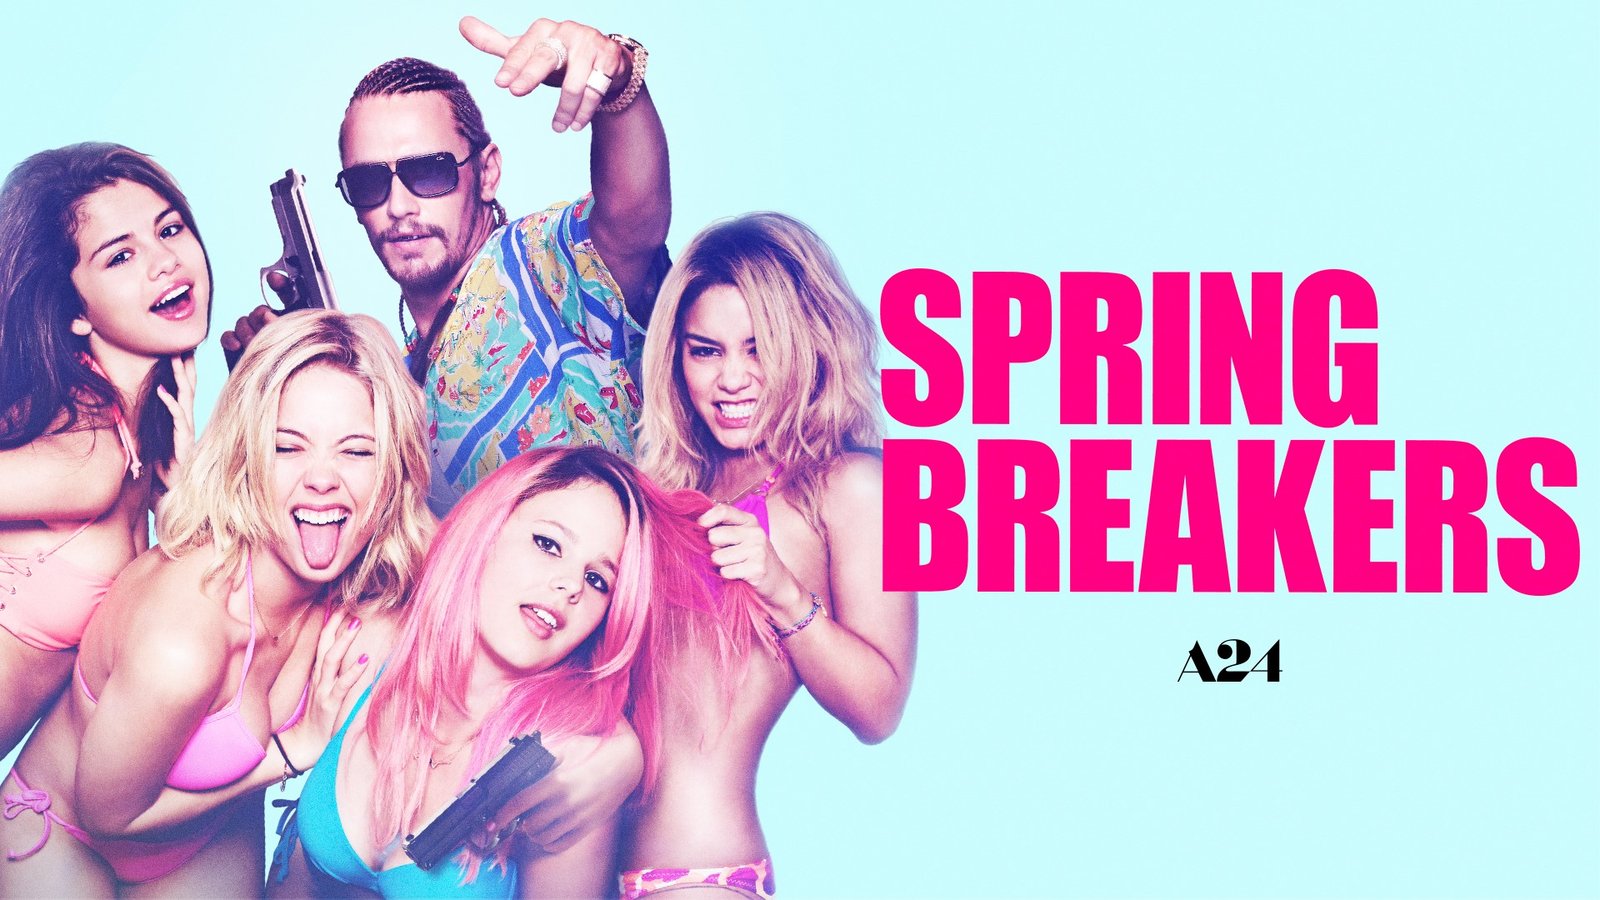 where can i watch the movie spring breakers online